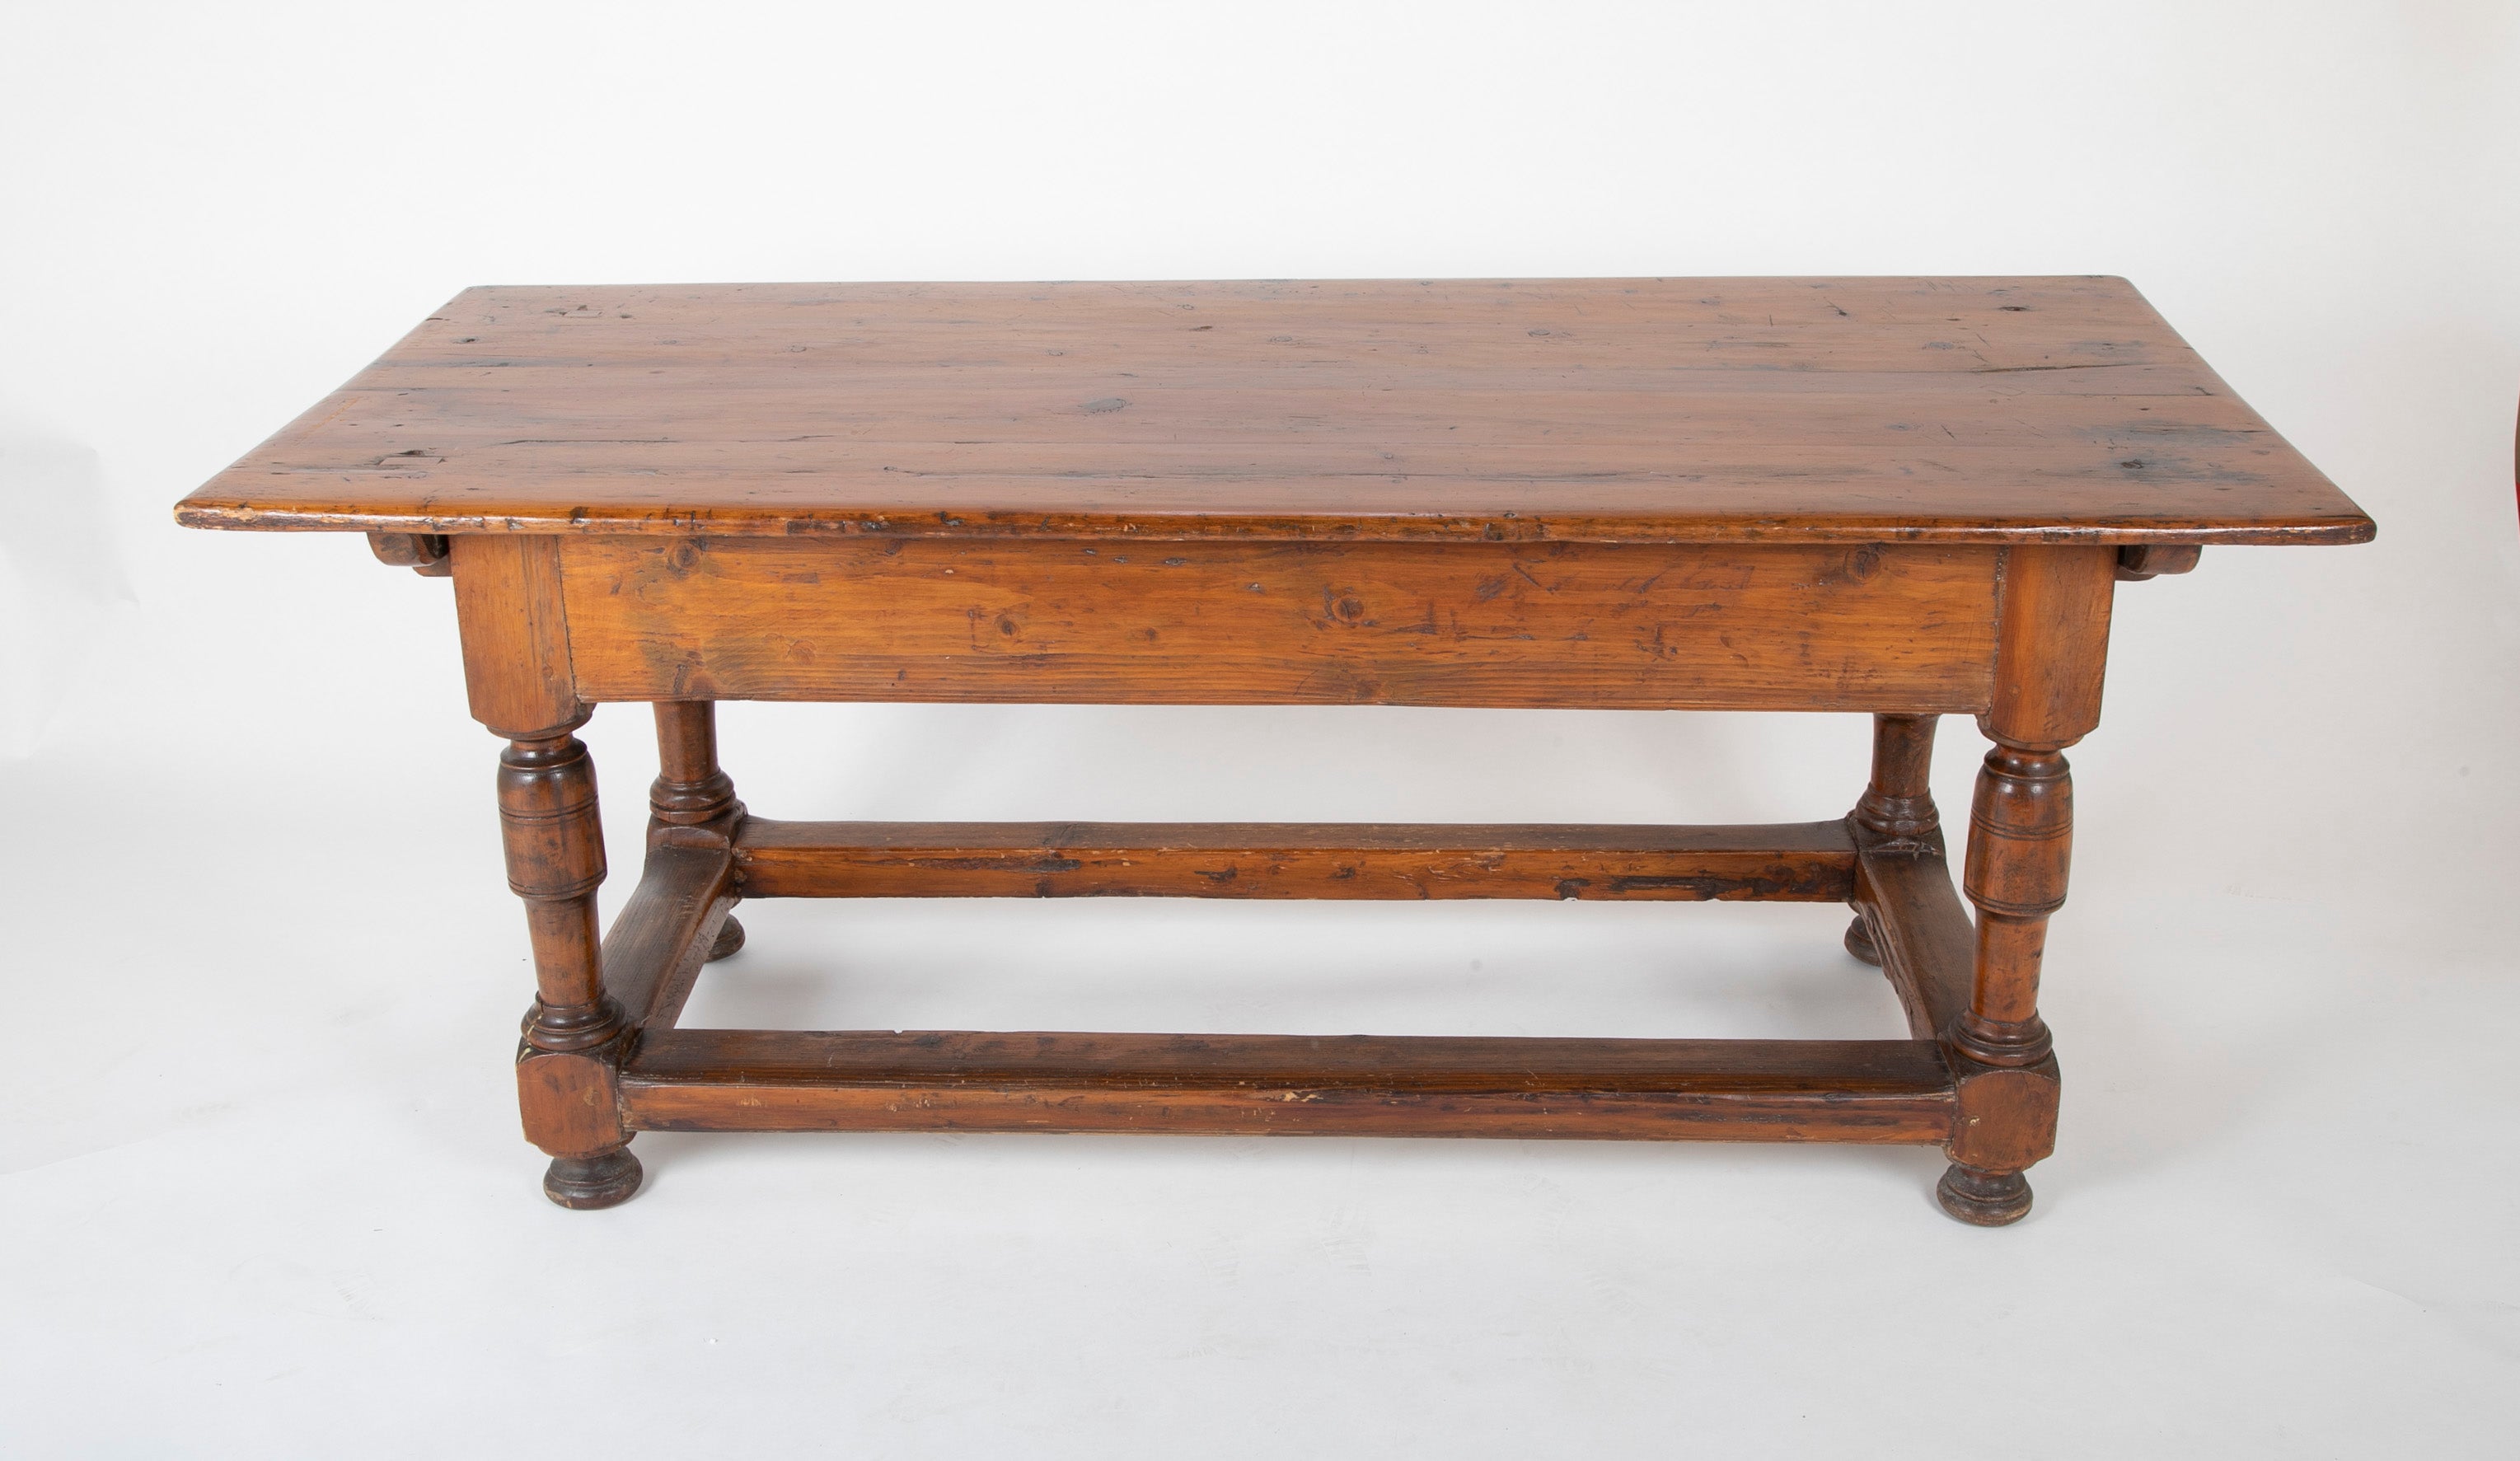 Southern Hard Pine Farm Table Made by Freed Slave